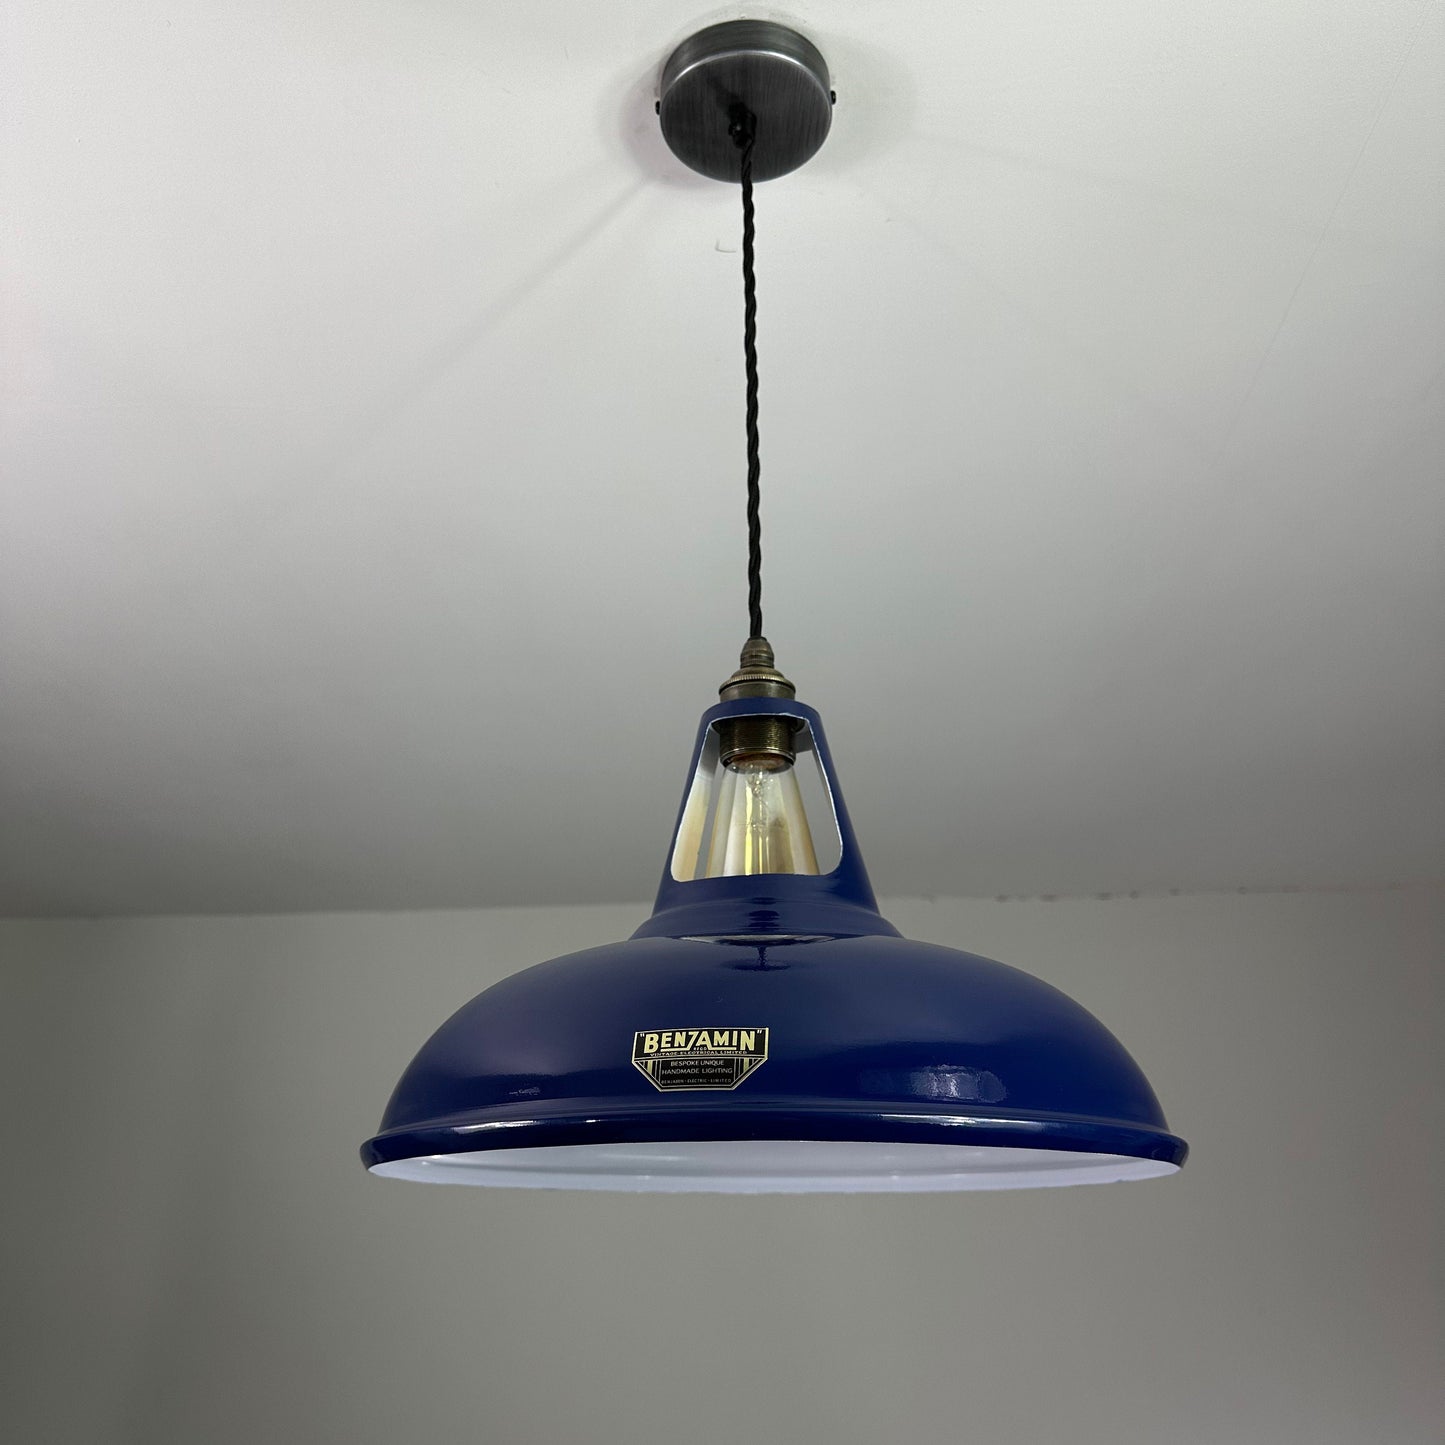 Cawston XL ~ Blue Solid Shade Slotted Design Pendant Set Light | Ceiling Dining Room | Kitchen Table | Vintage Filament Bulb 14 Inch